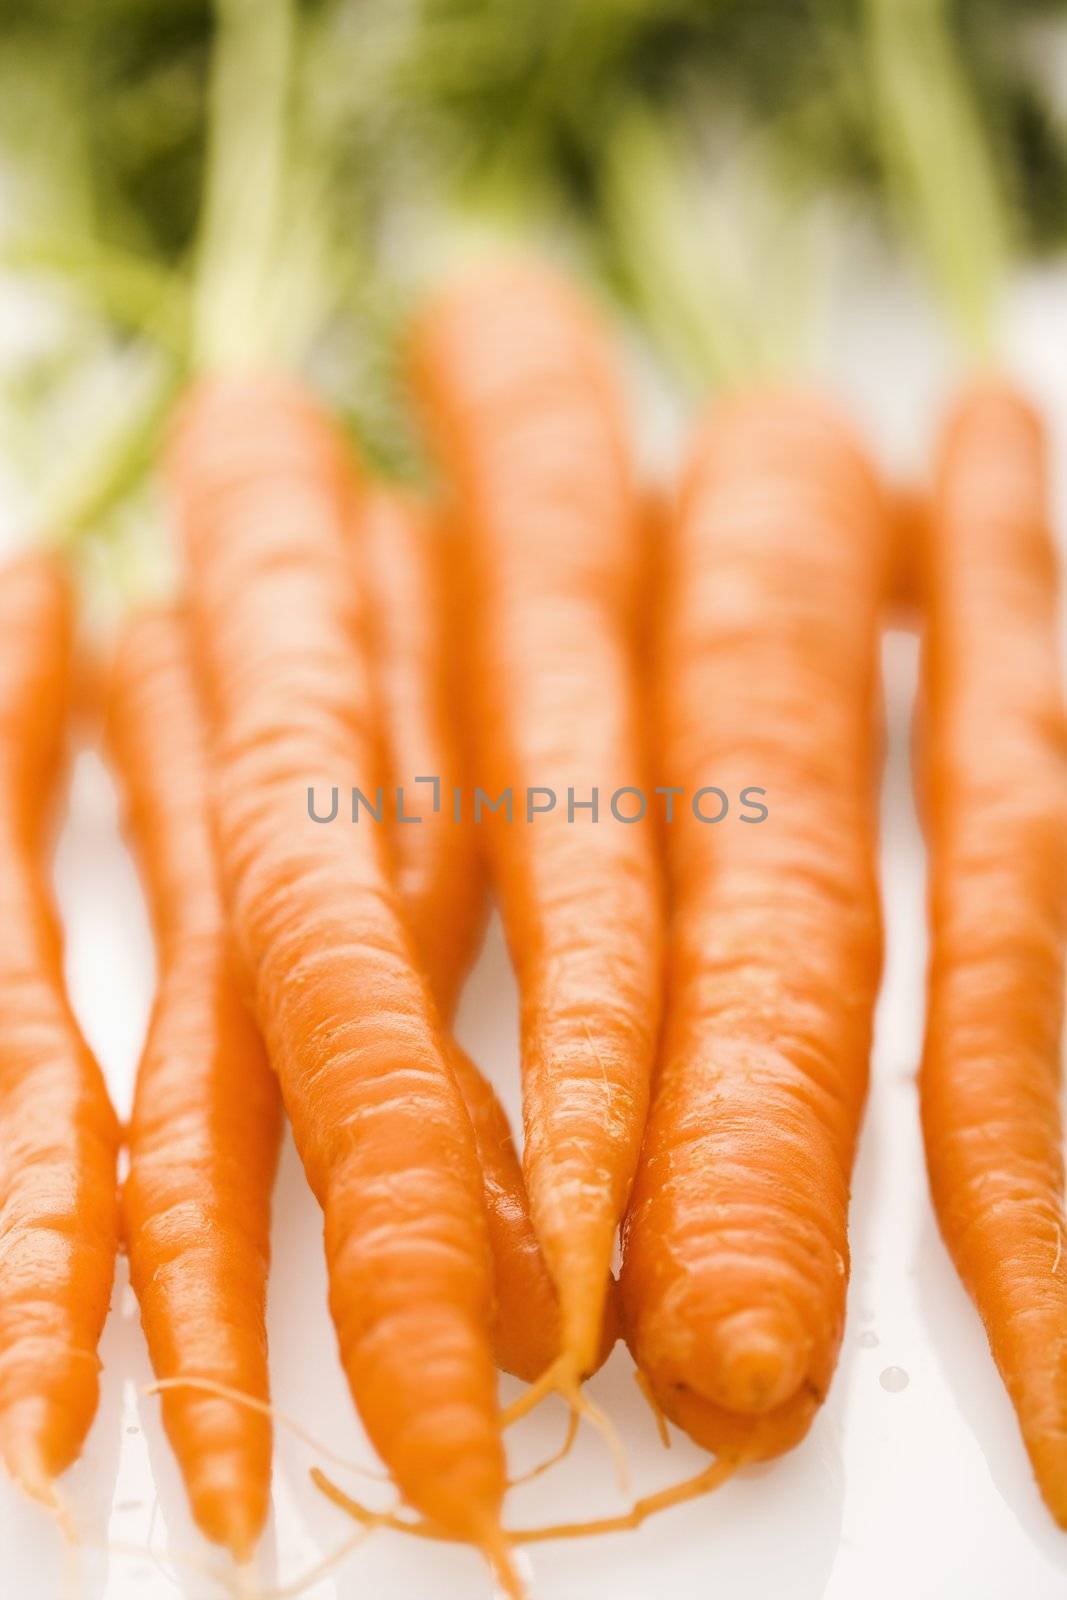 Bunch of orange carrots with green tops on white background.